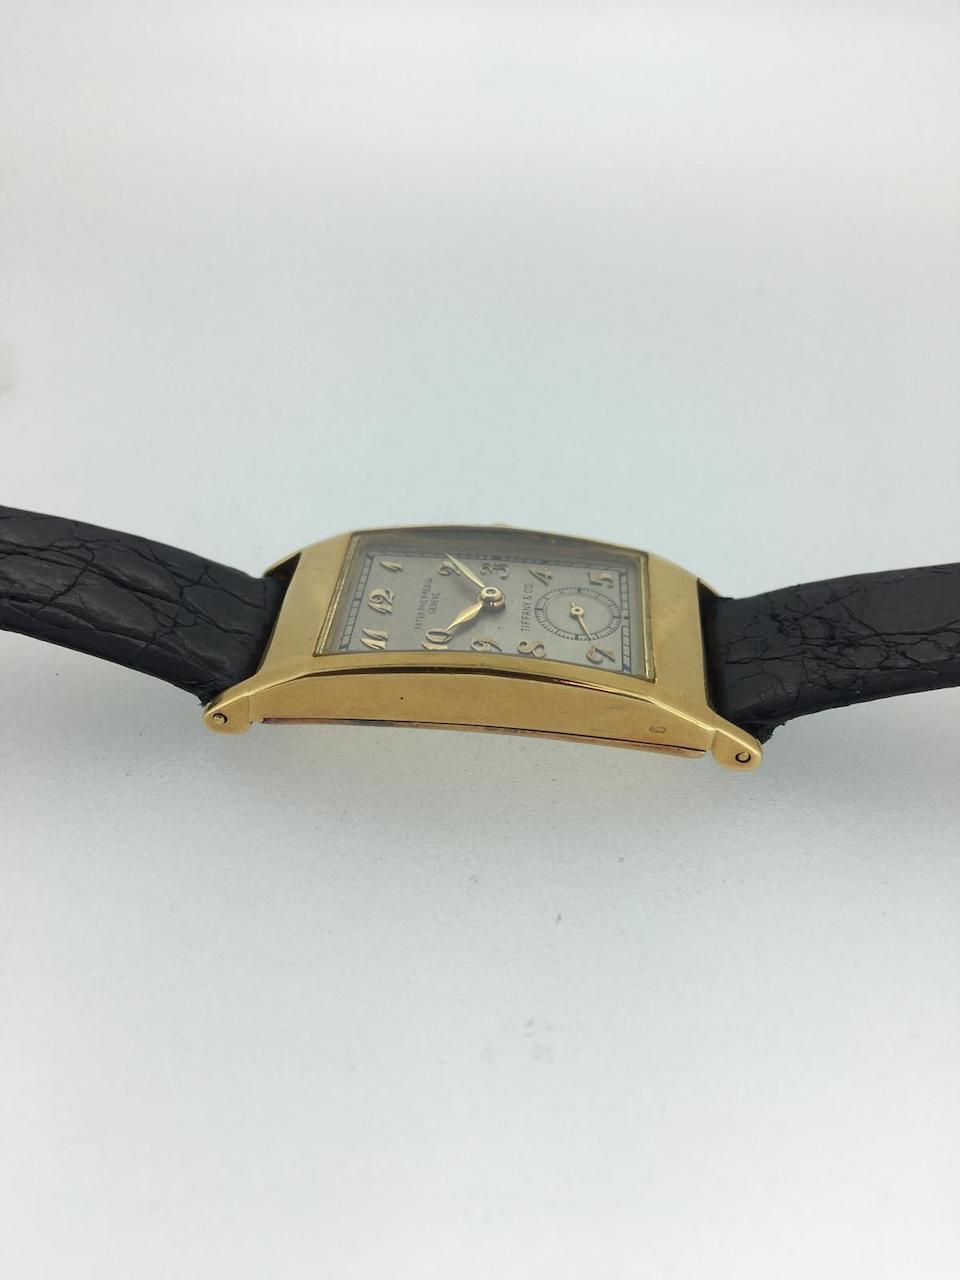 Patek, Philippe & Co, Geneve. A rare double signed 18K gold manual wind rectangular wristwatch retailed by Tiffany & Co.  Tegolino, Retailed by Tiffany & Co., Ref: 425, Sold 21st April 1941